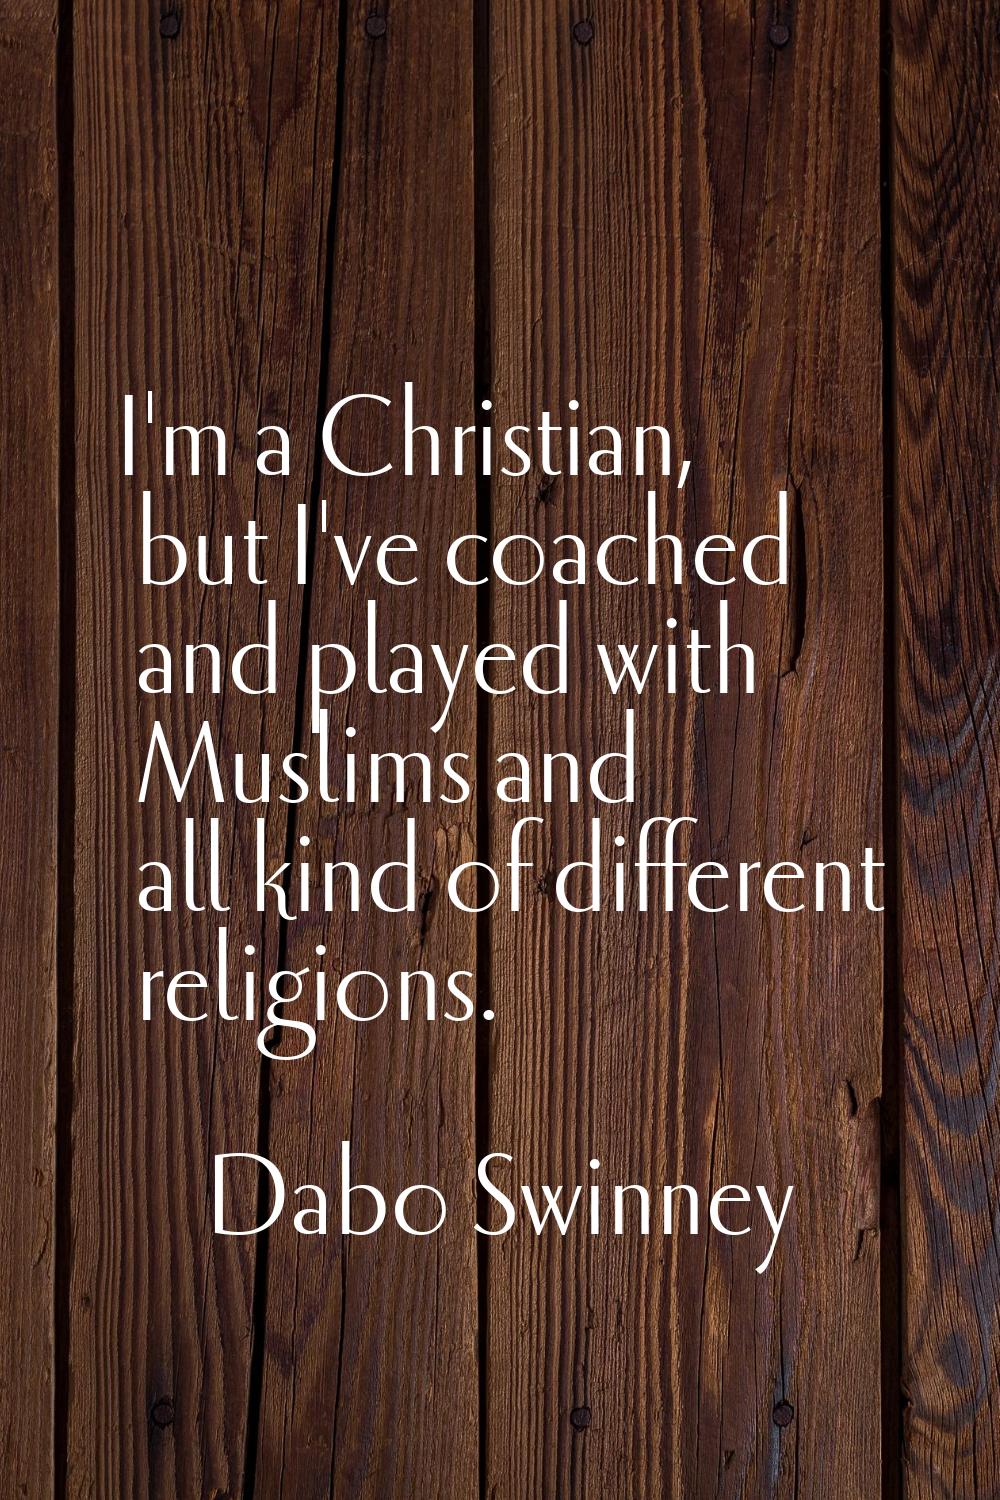 I'm a Christian, but I've coached and played with Muslims and all kind of different religions.